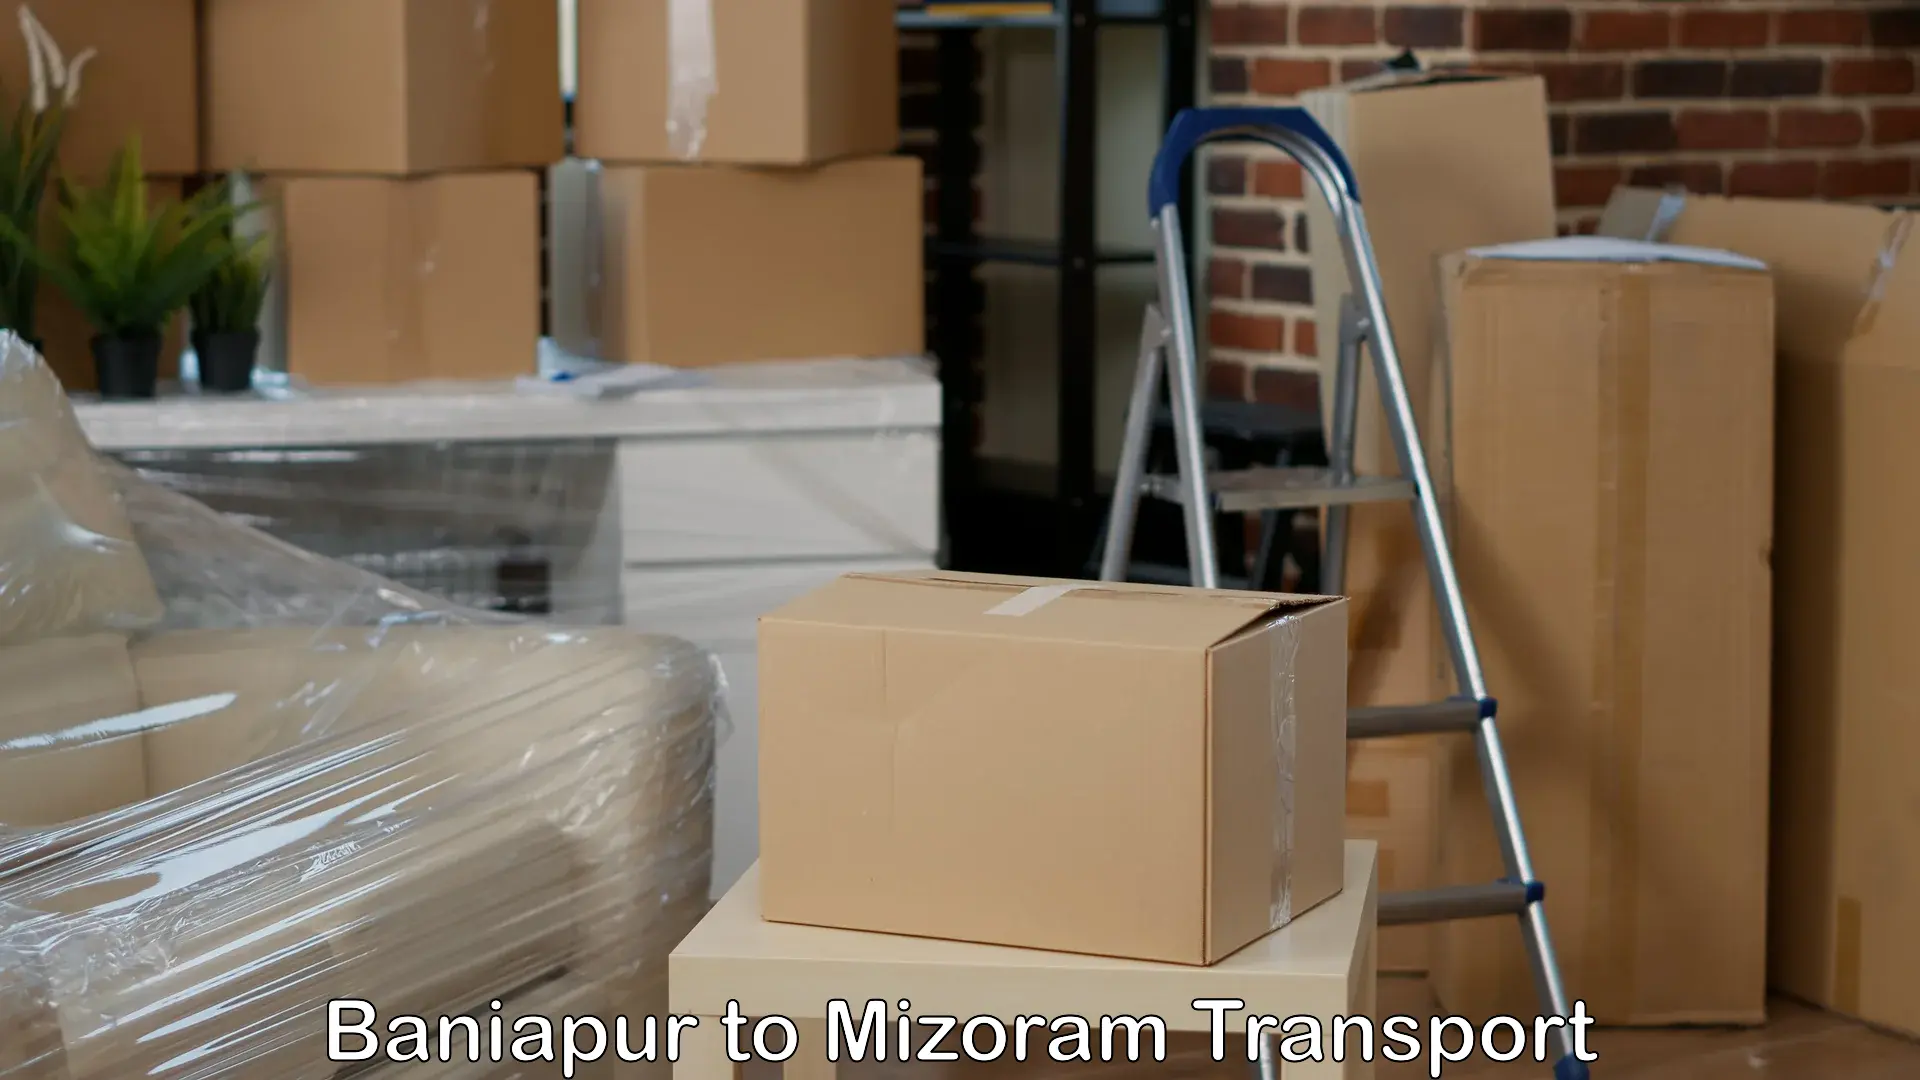 Daily parcel service transport Baniapur to Aizawl